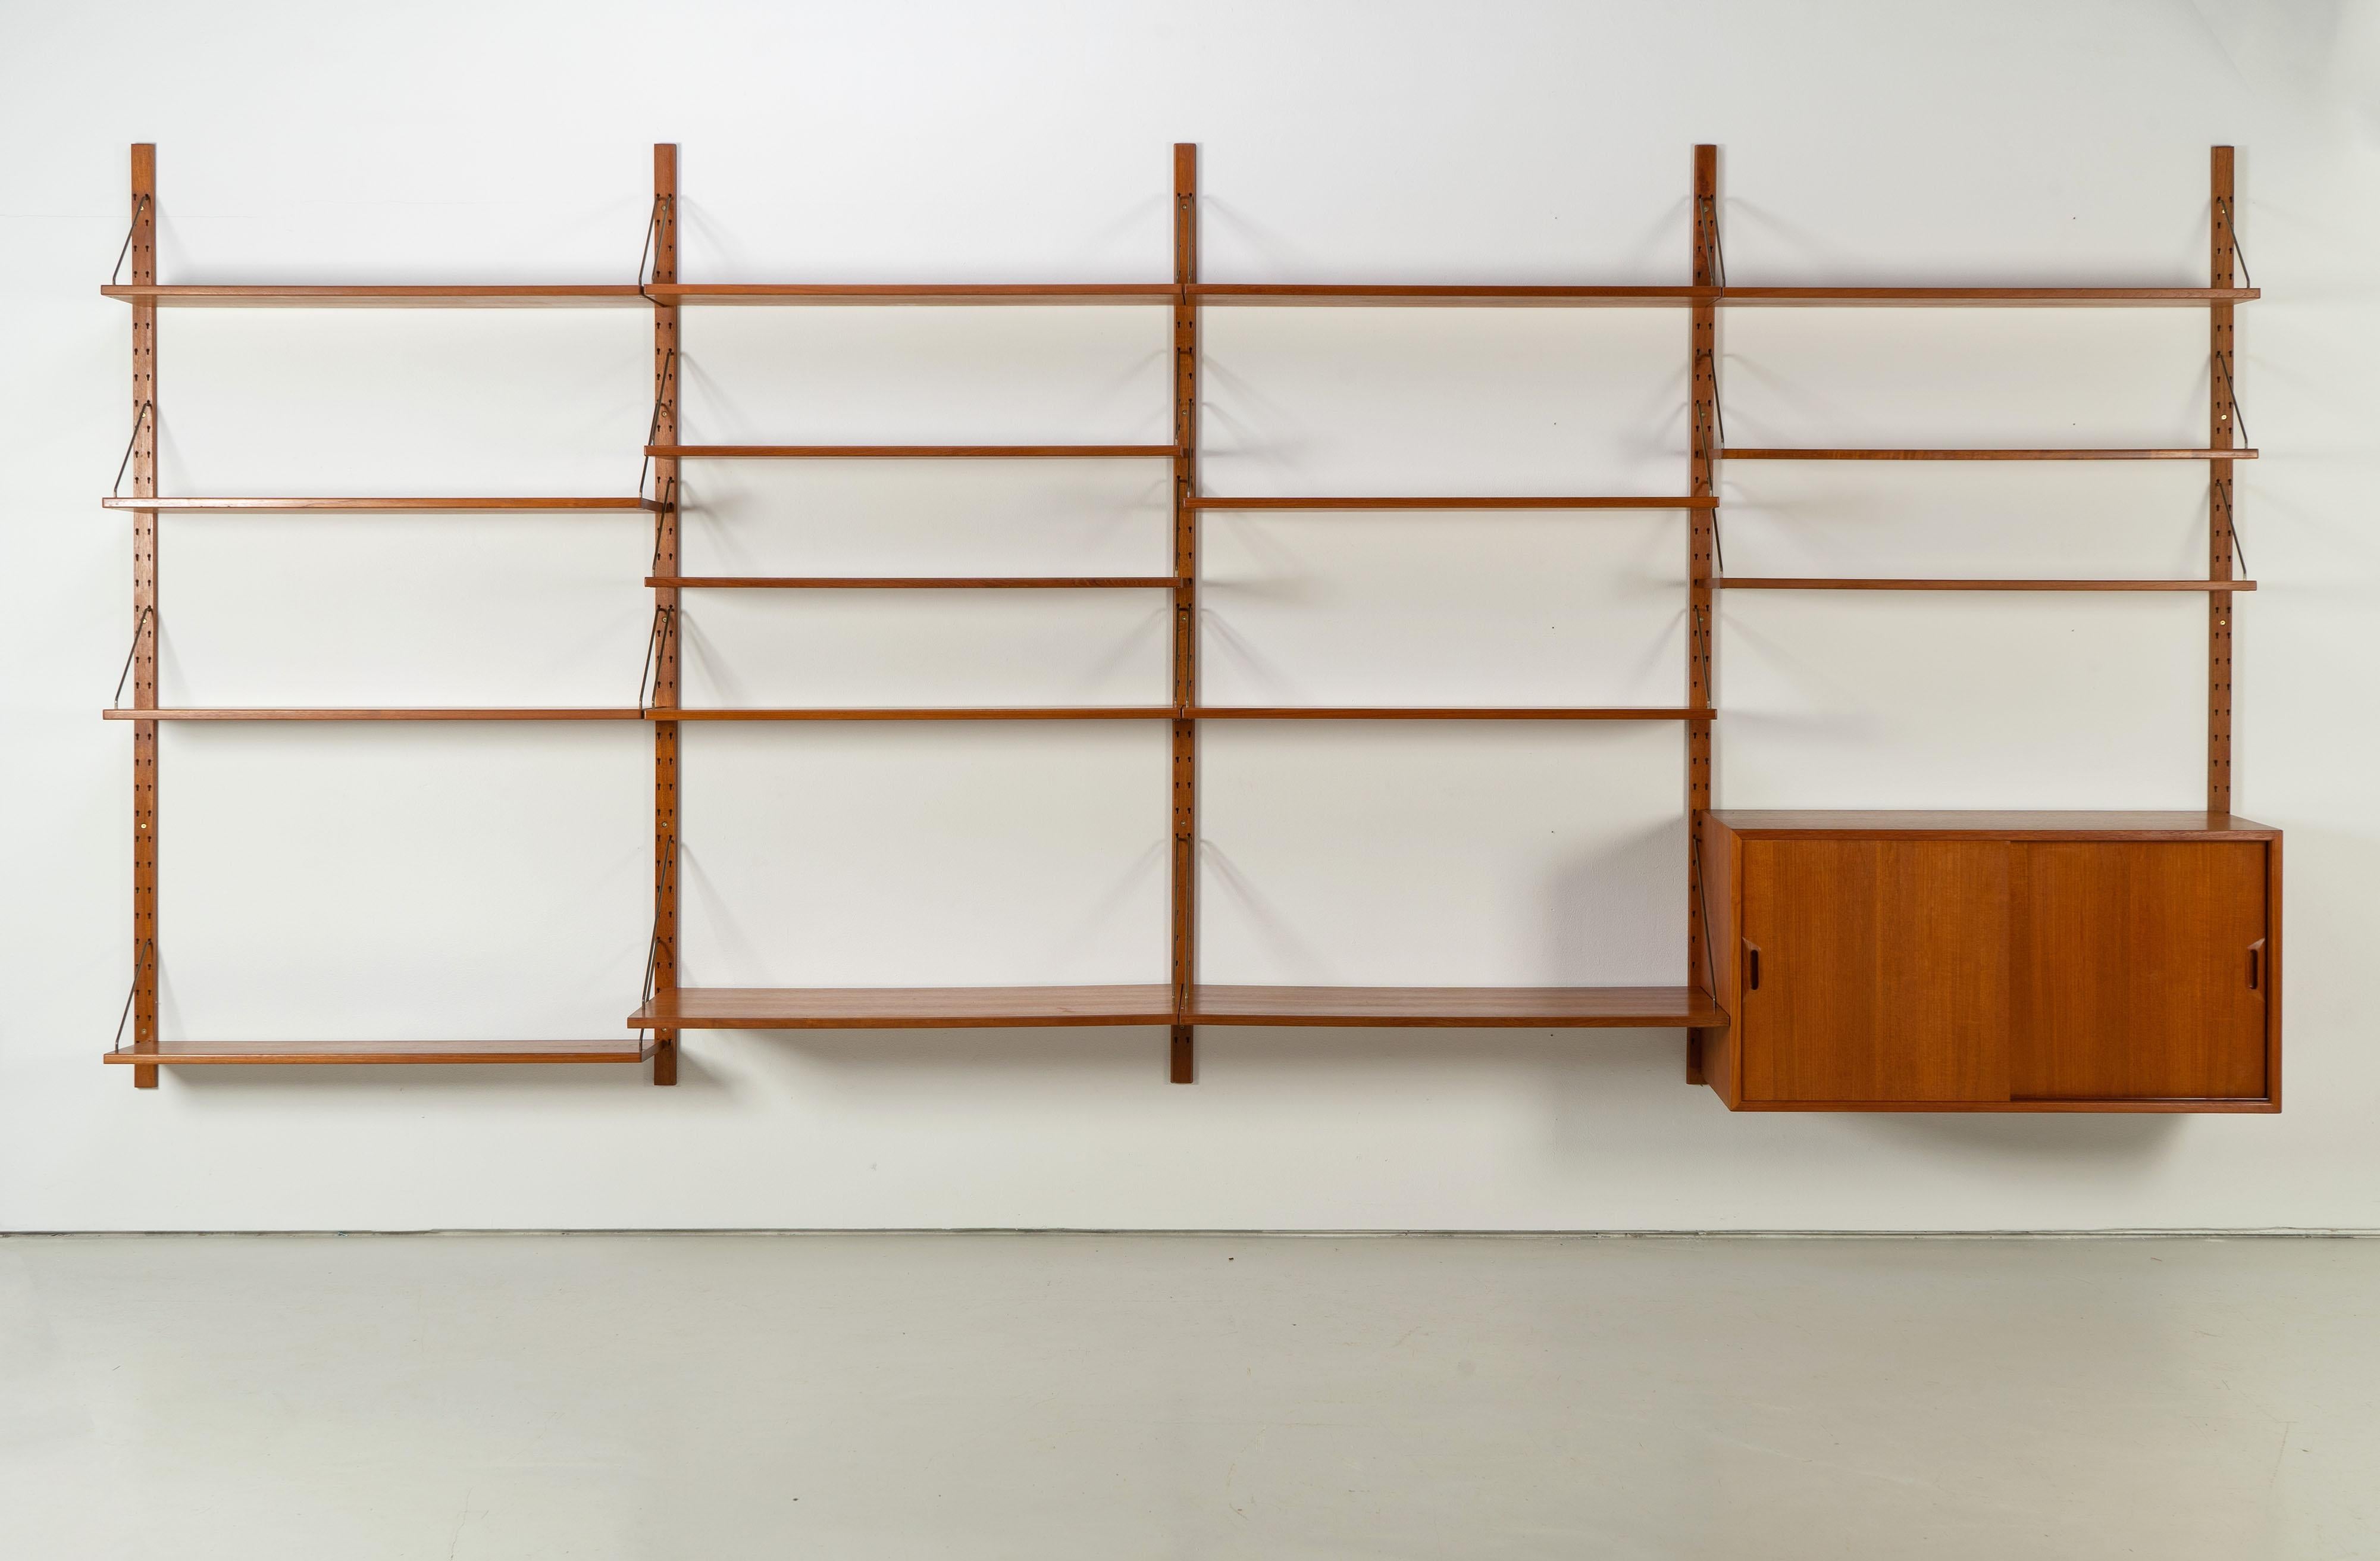 Large wall shelf from Sven Ellekaer from the 1960s. The shelf impresses with excellent teak and patinated brass, as well as finely crafted details.